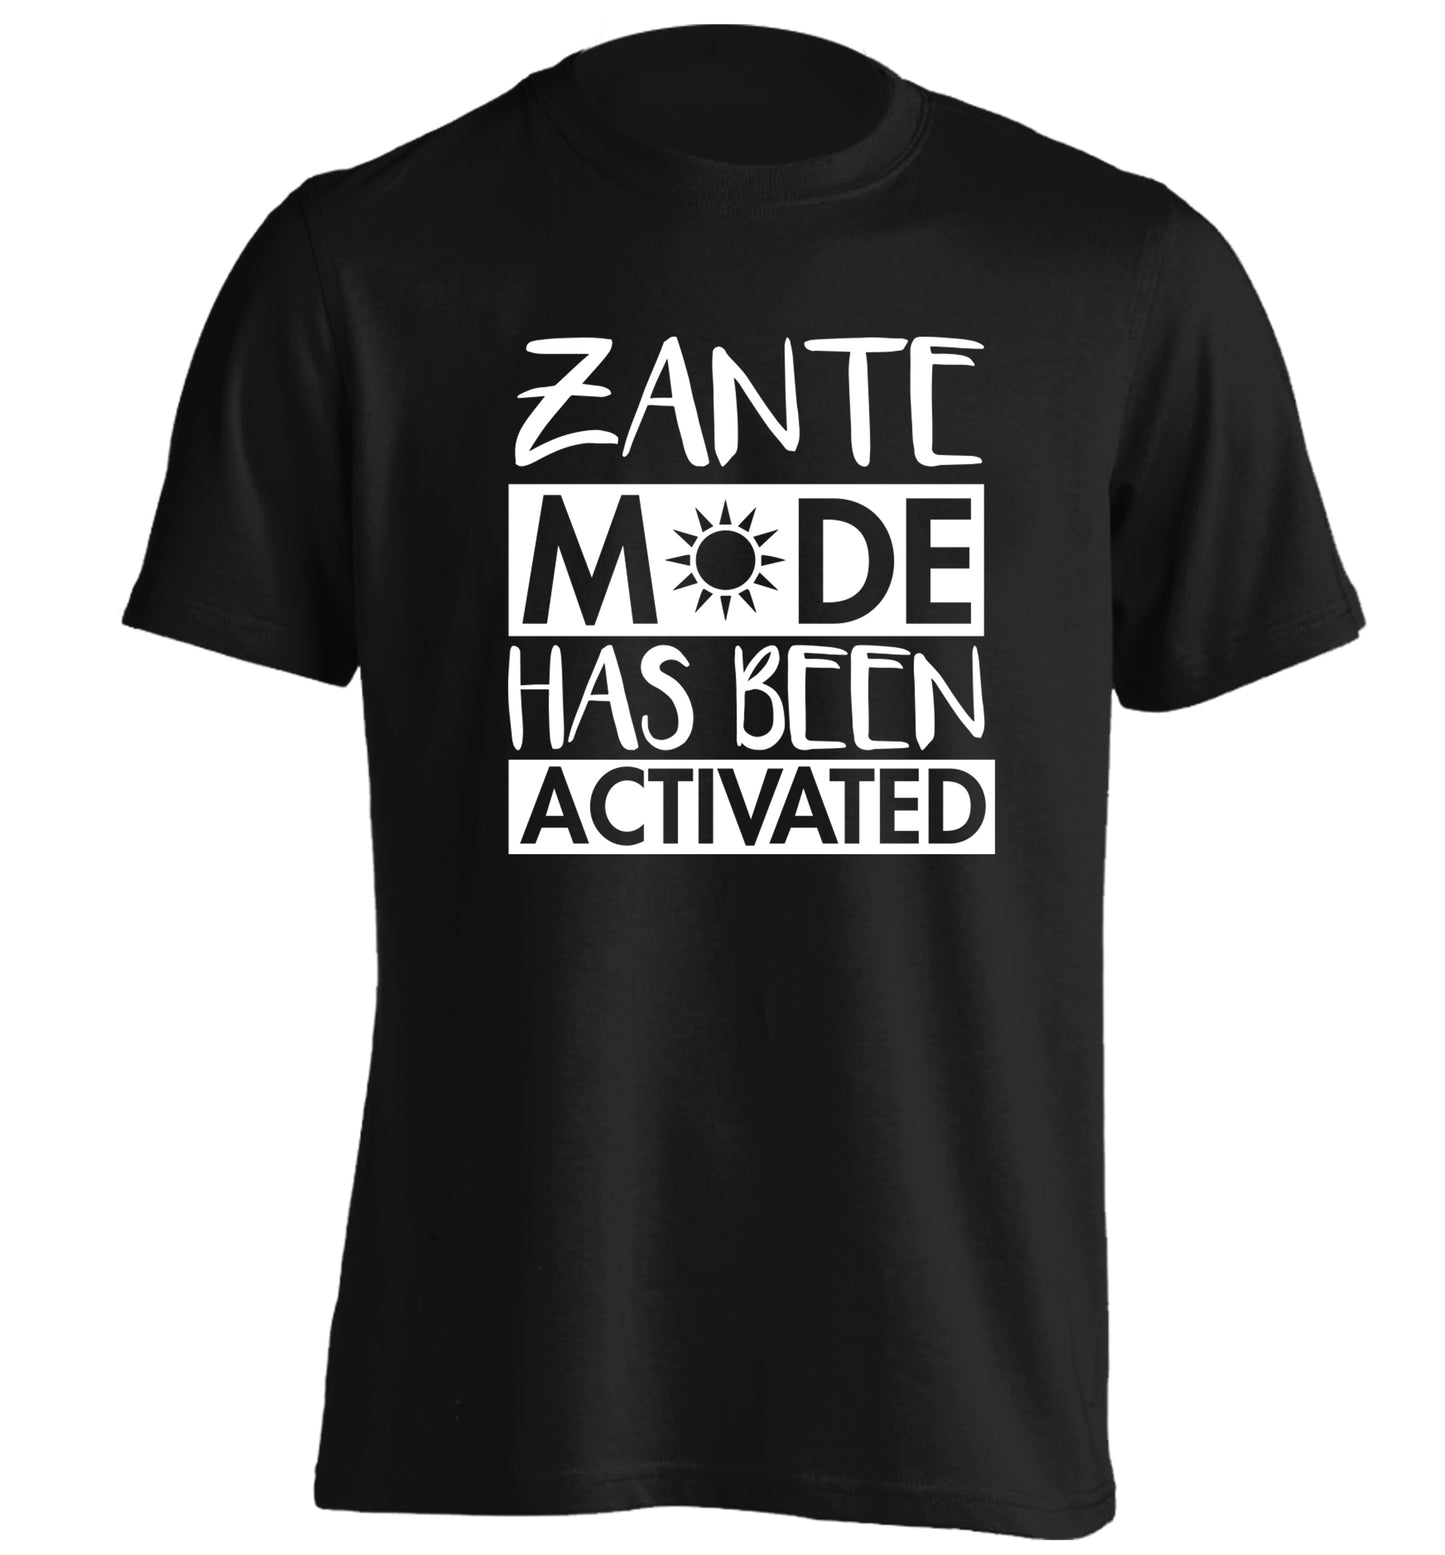 Zante mode has been activated adults unisex black Tshirt 2XL